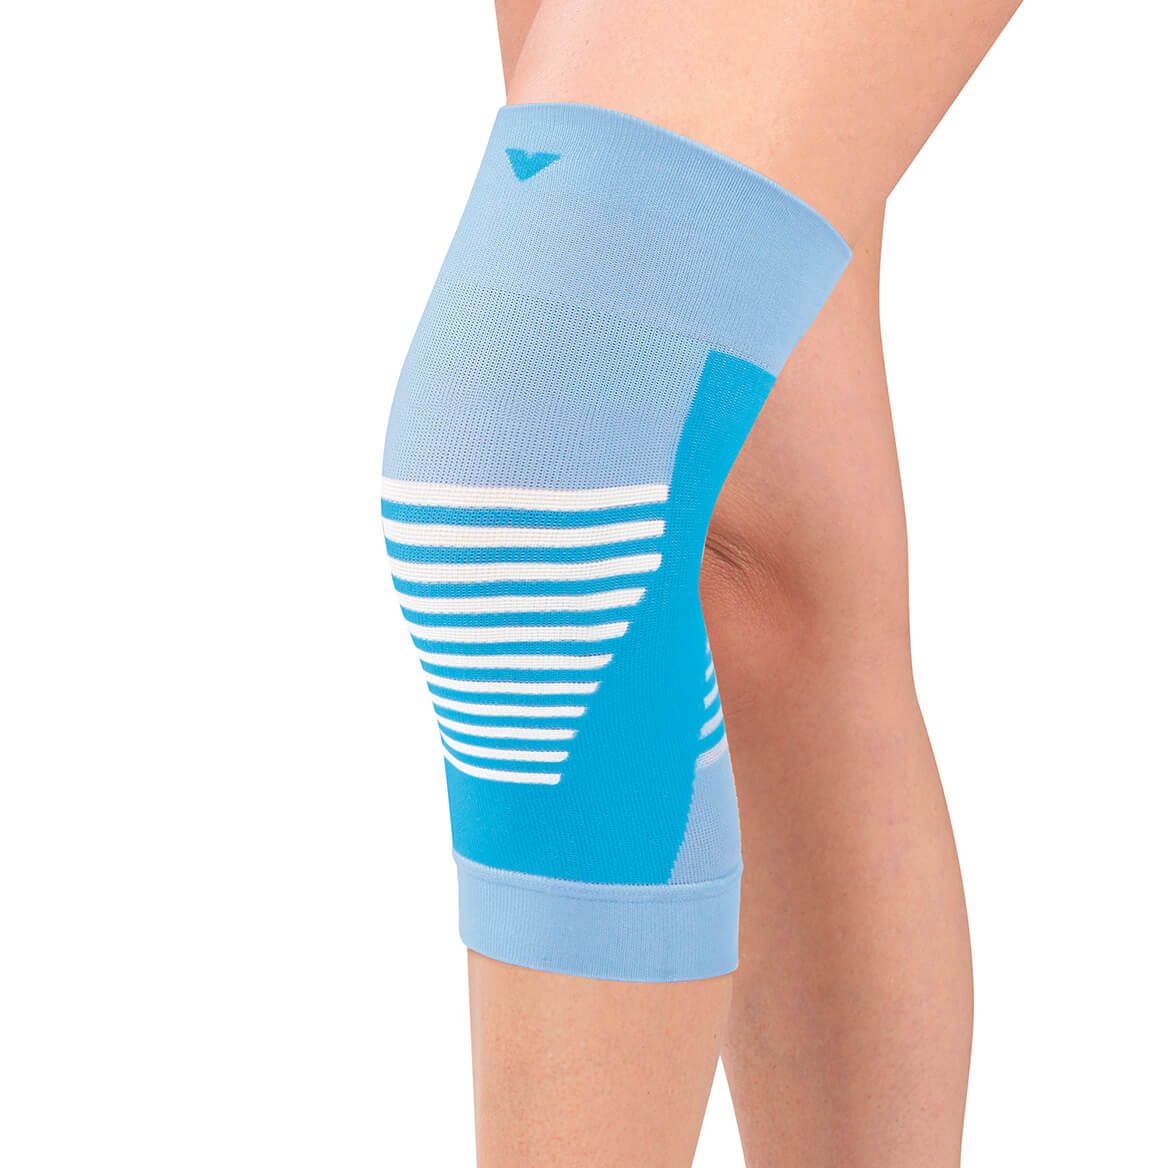 Kinetic Knee Support + '-' + 370302